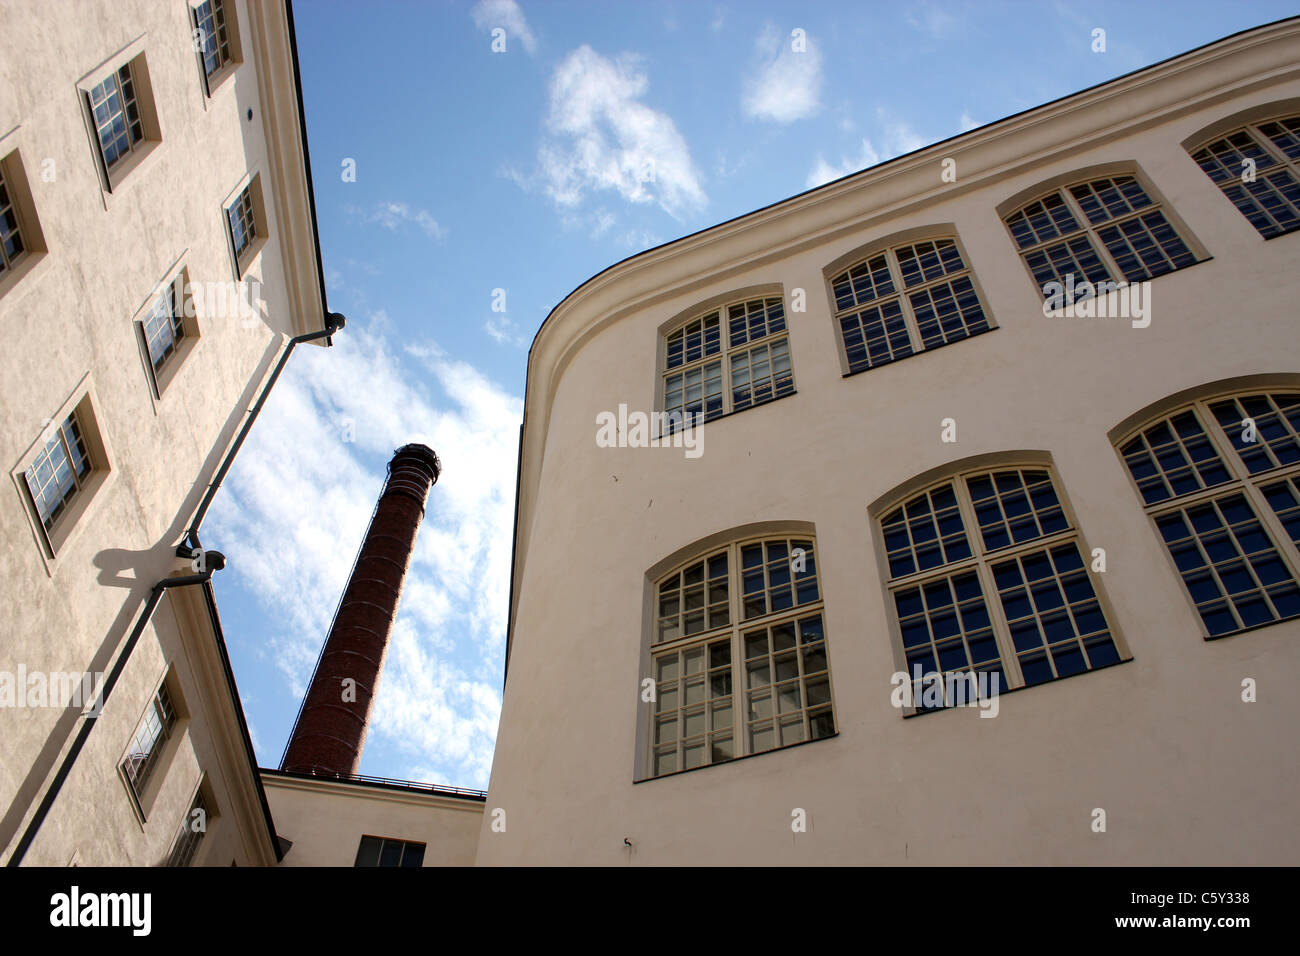 Old factory buildings at Finlayson district Tampere, Finland Stock Photo